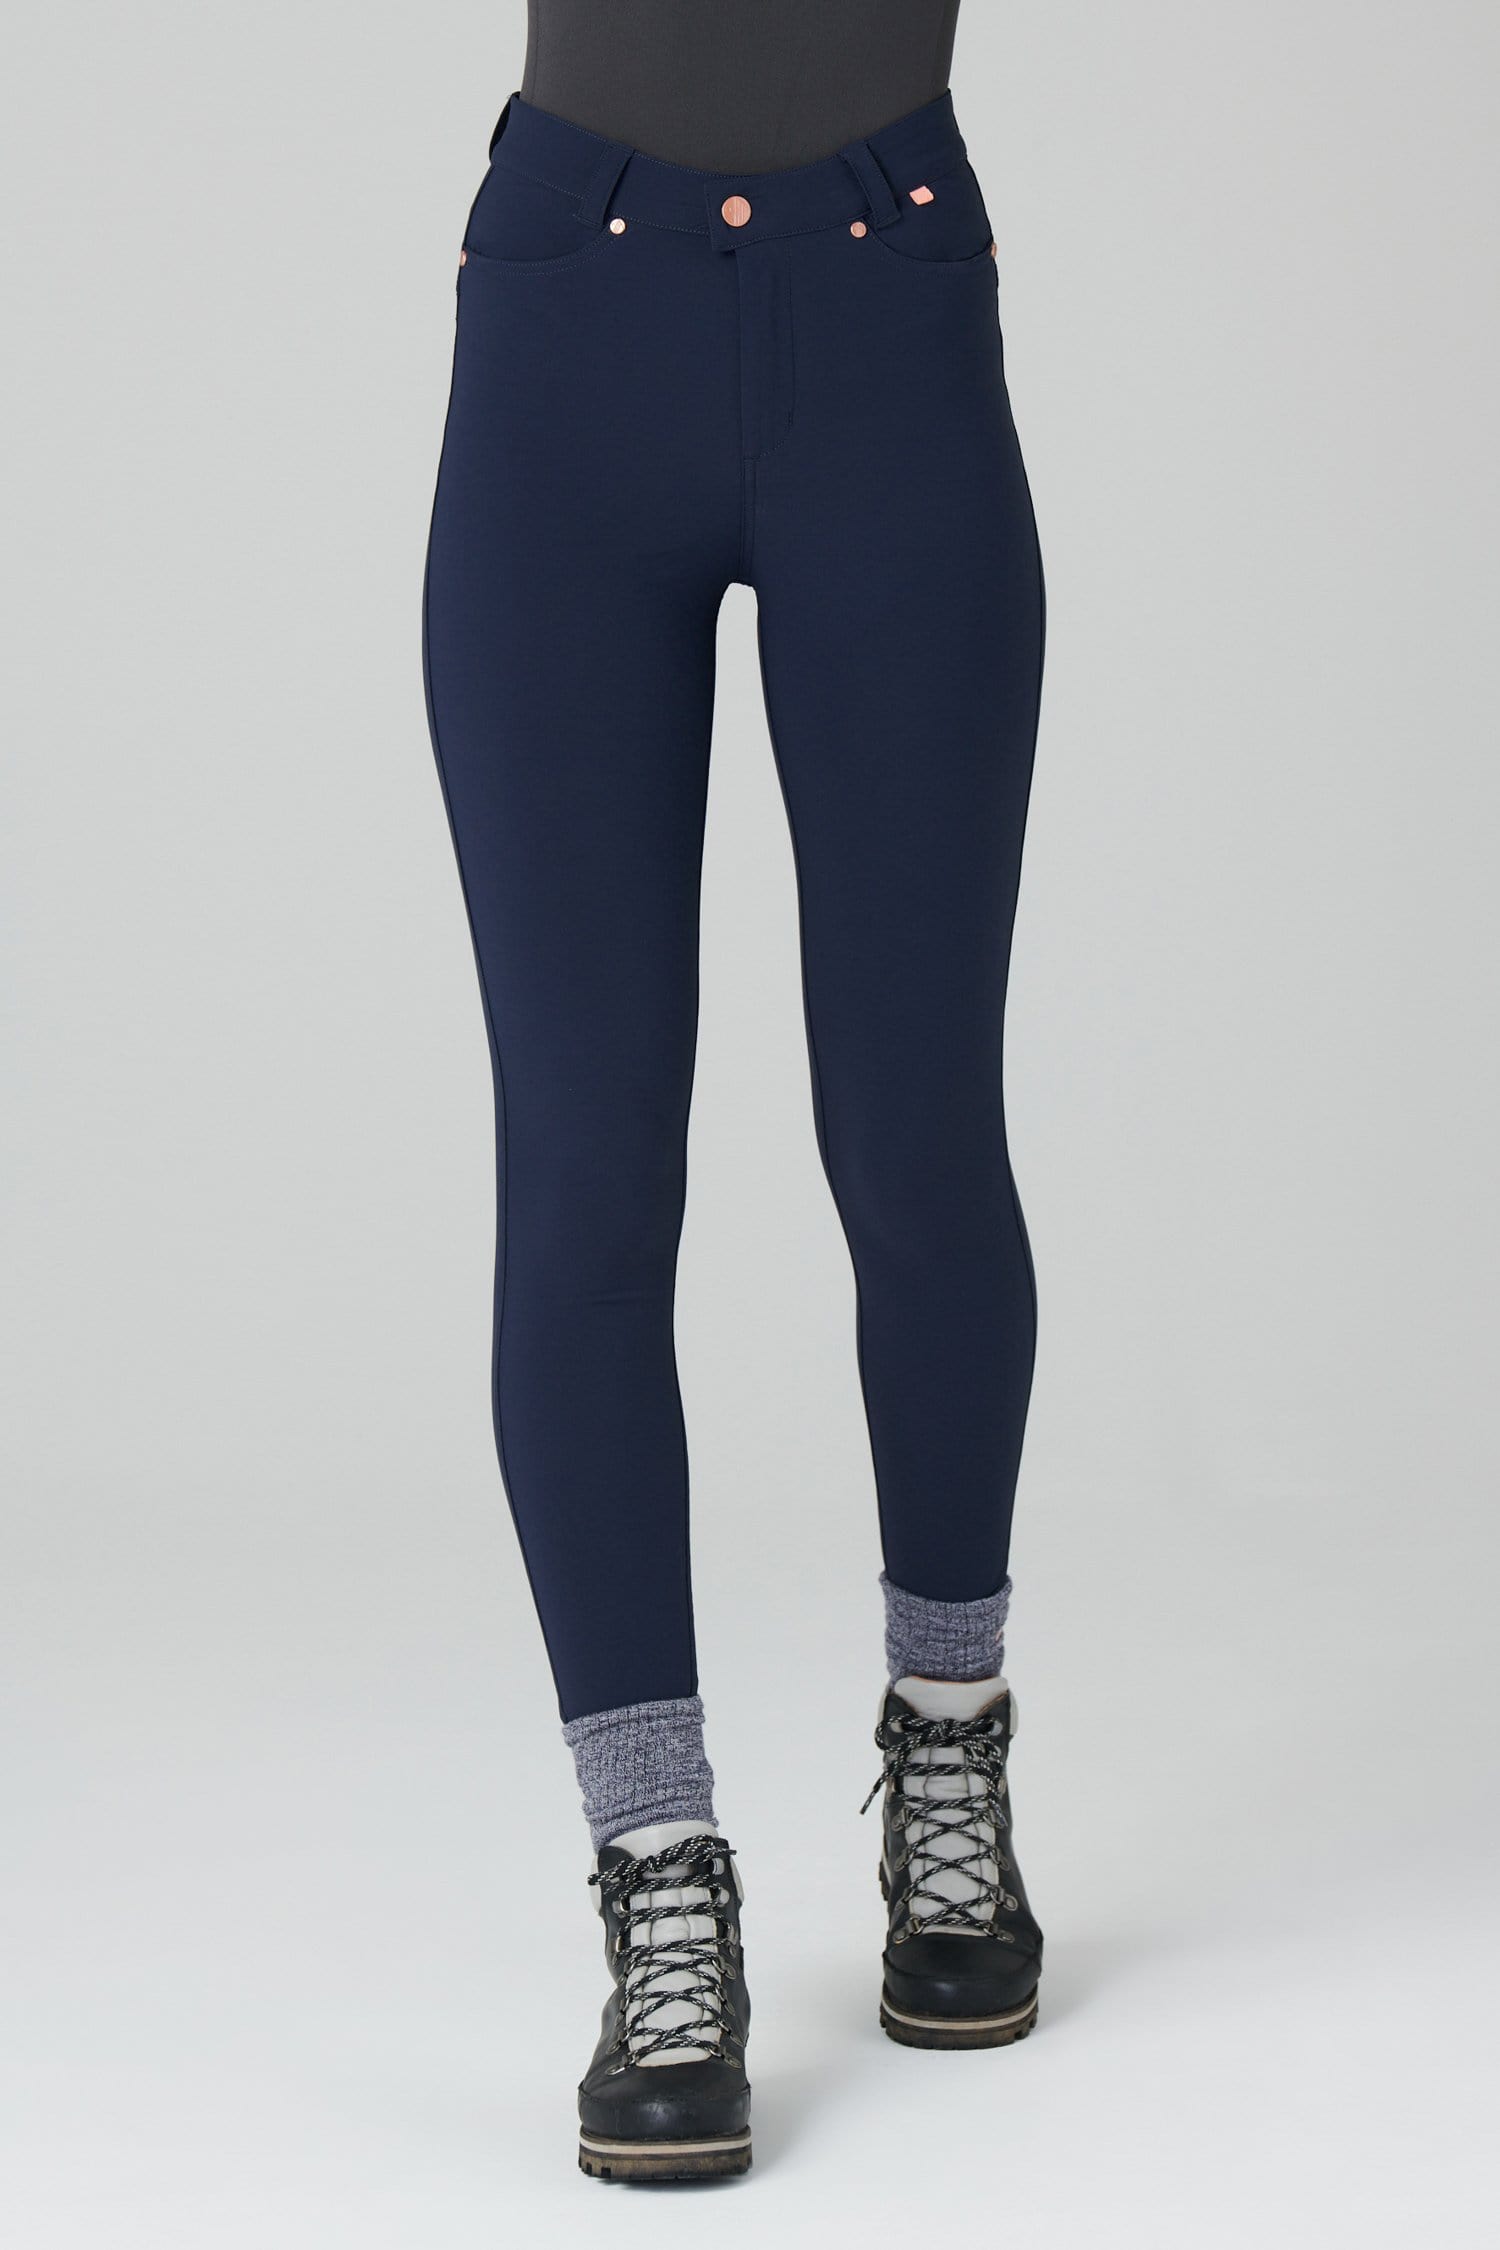 Max Stretch Skinny Outdoor Trousers - Deep Navy - 34xl / Uk16 - Womens - Acai Outdoorwear